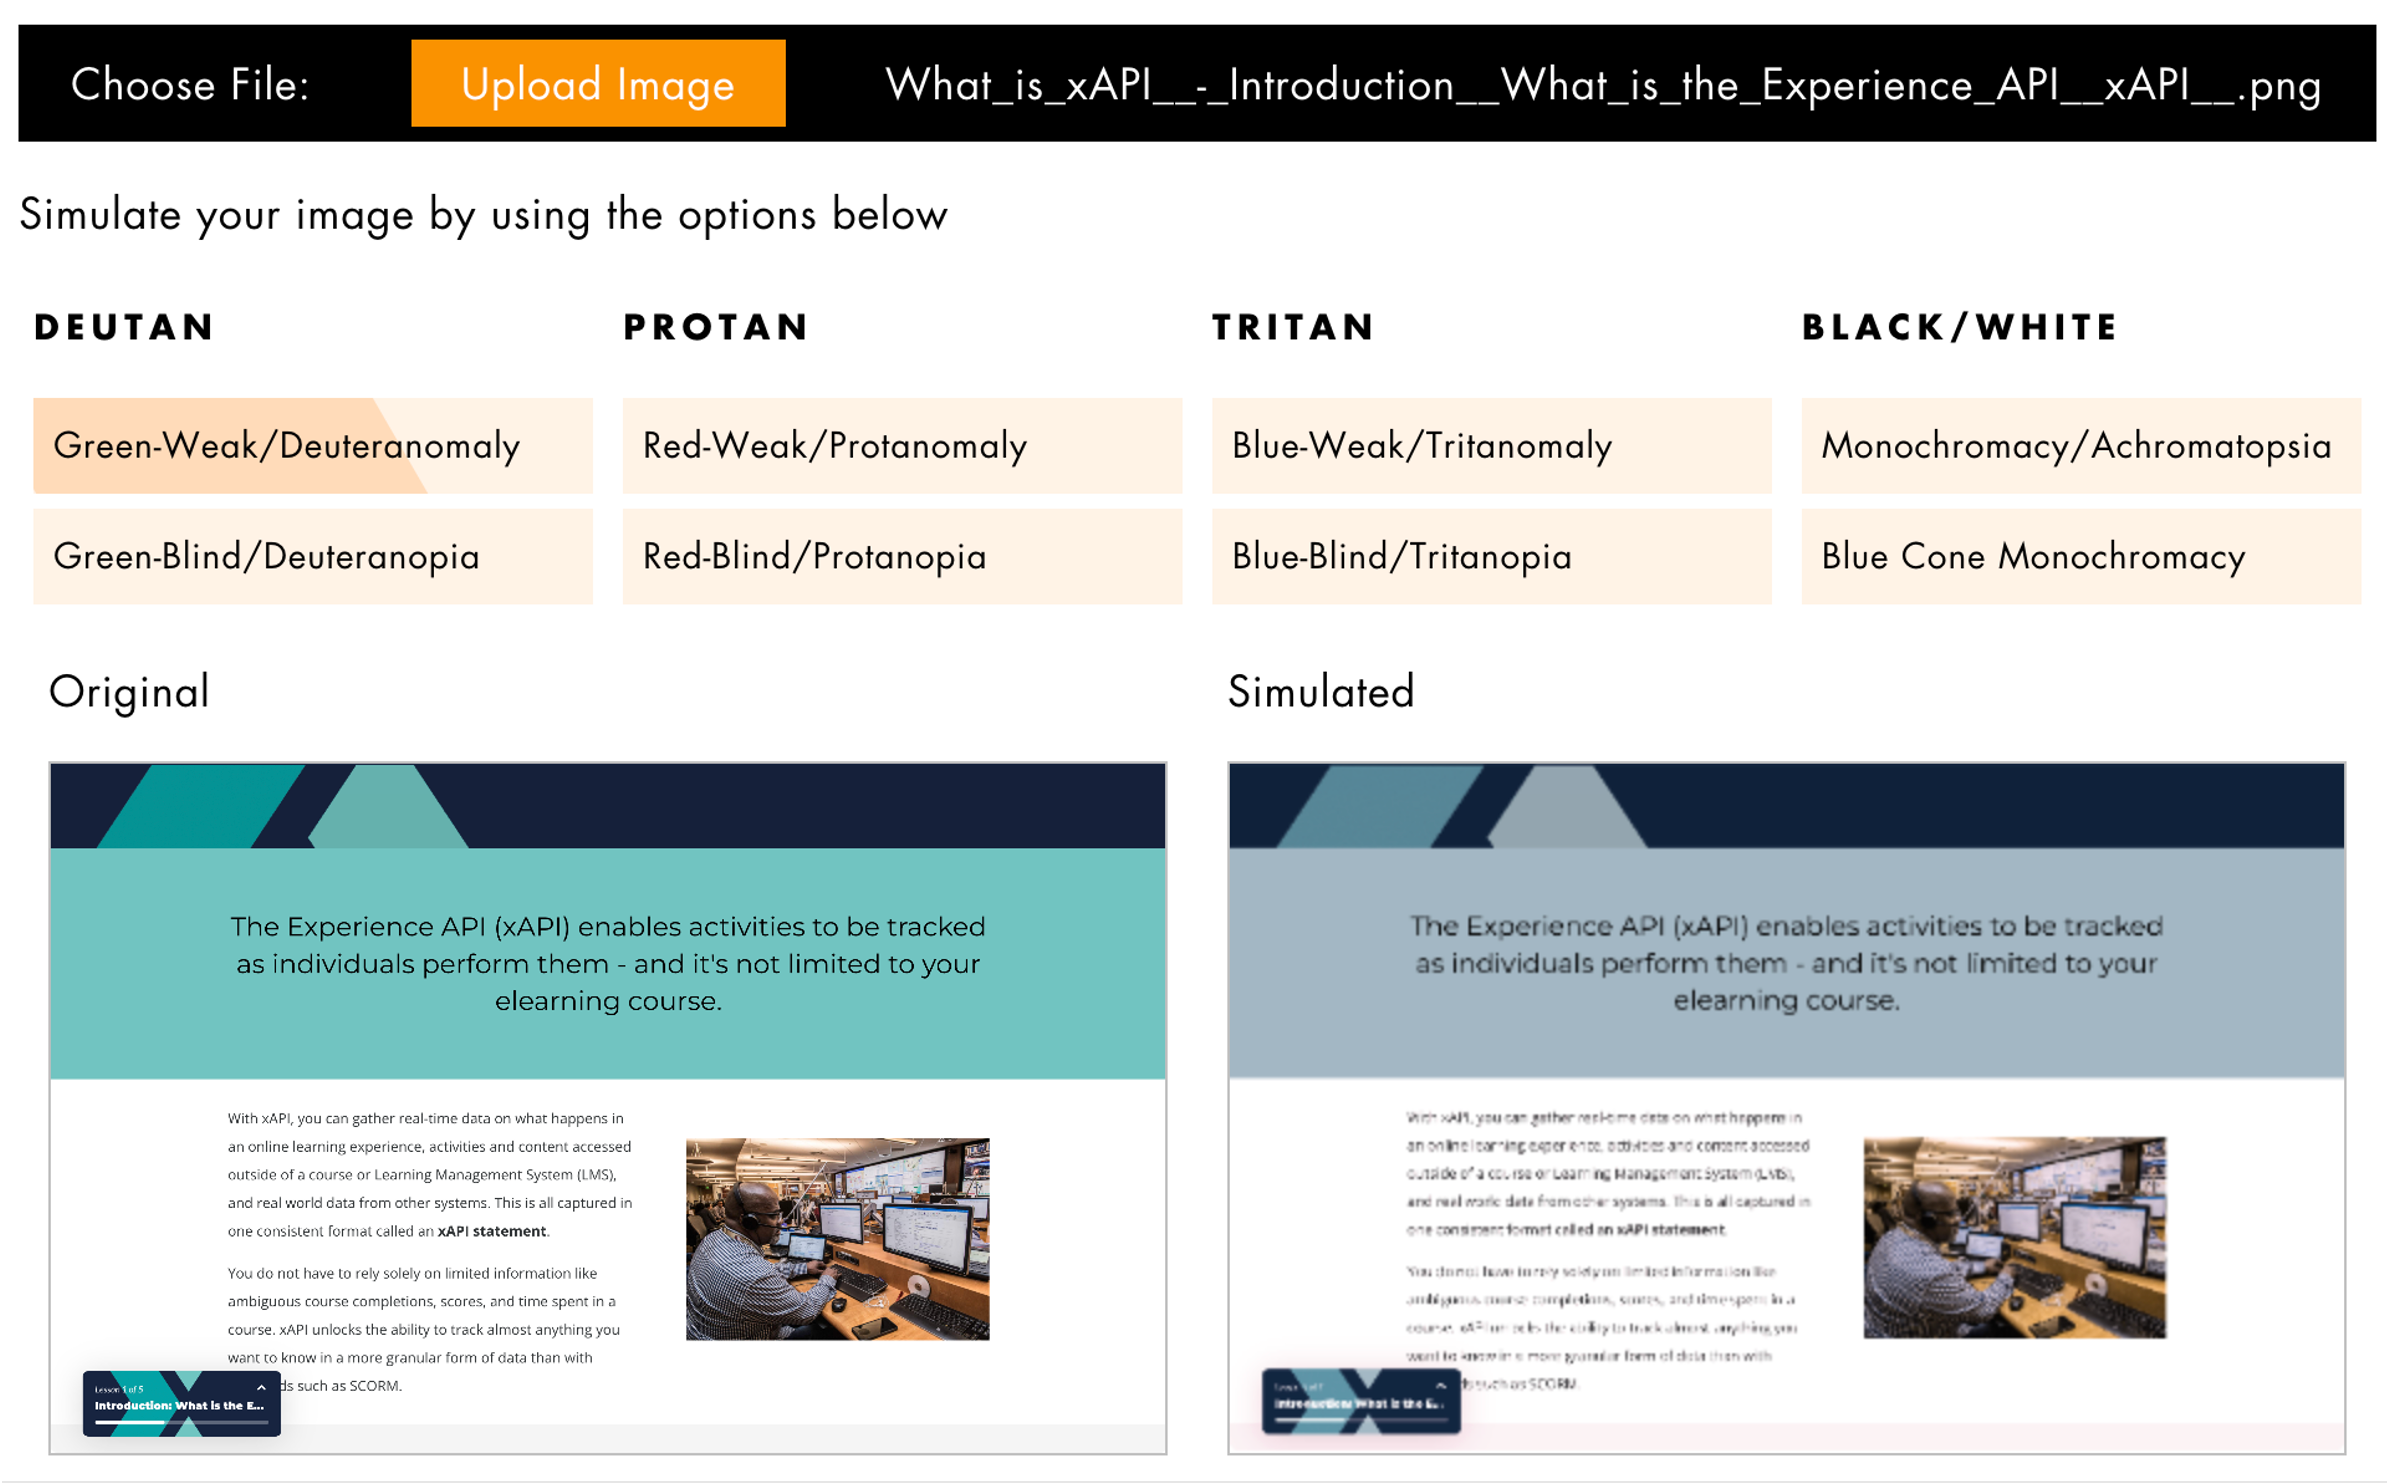 Screenshots of two eLearning courses—one with a Deutan check that shows the change in color from bright teal to a muted blue and a tritan check that shows the change in color from muted yellows and browns to shades of pink.